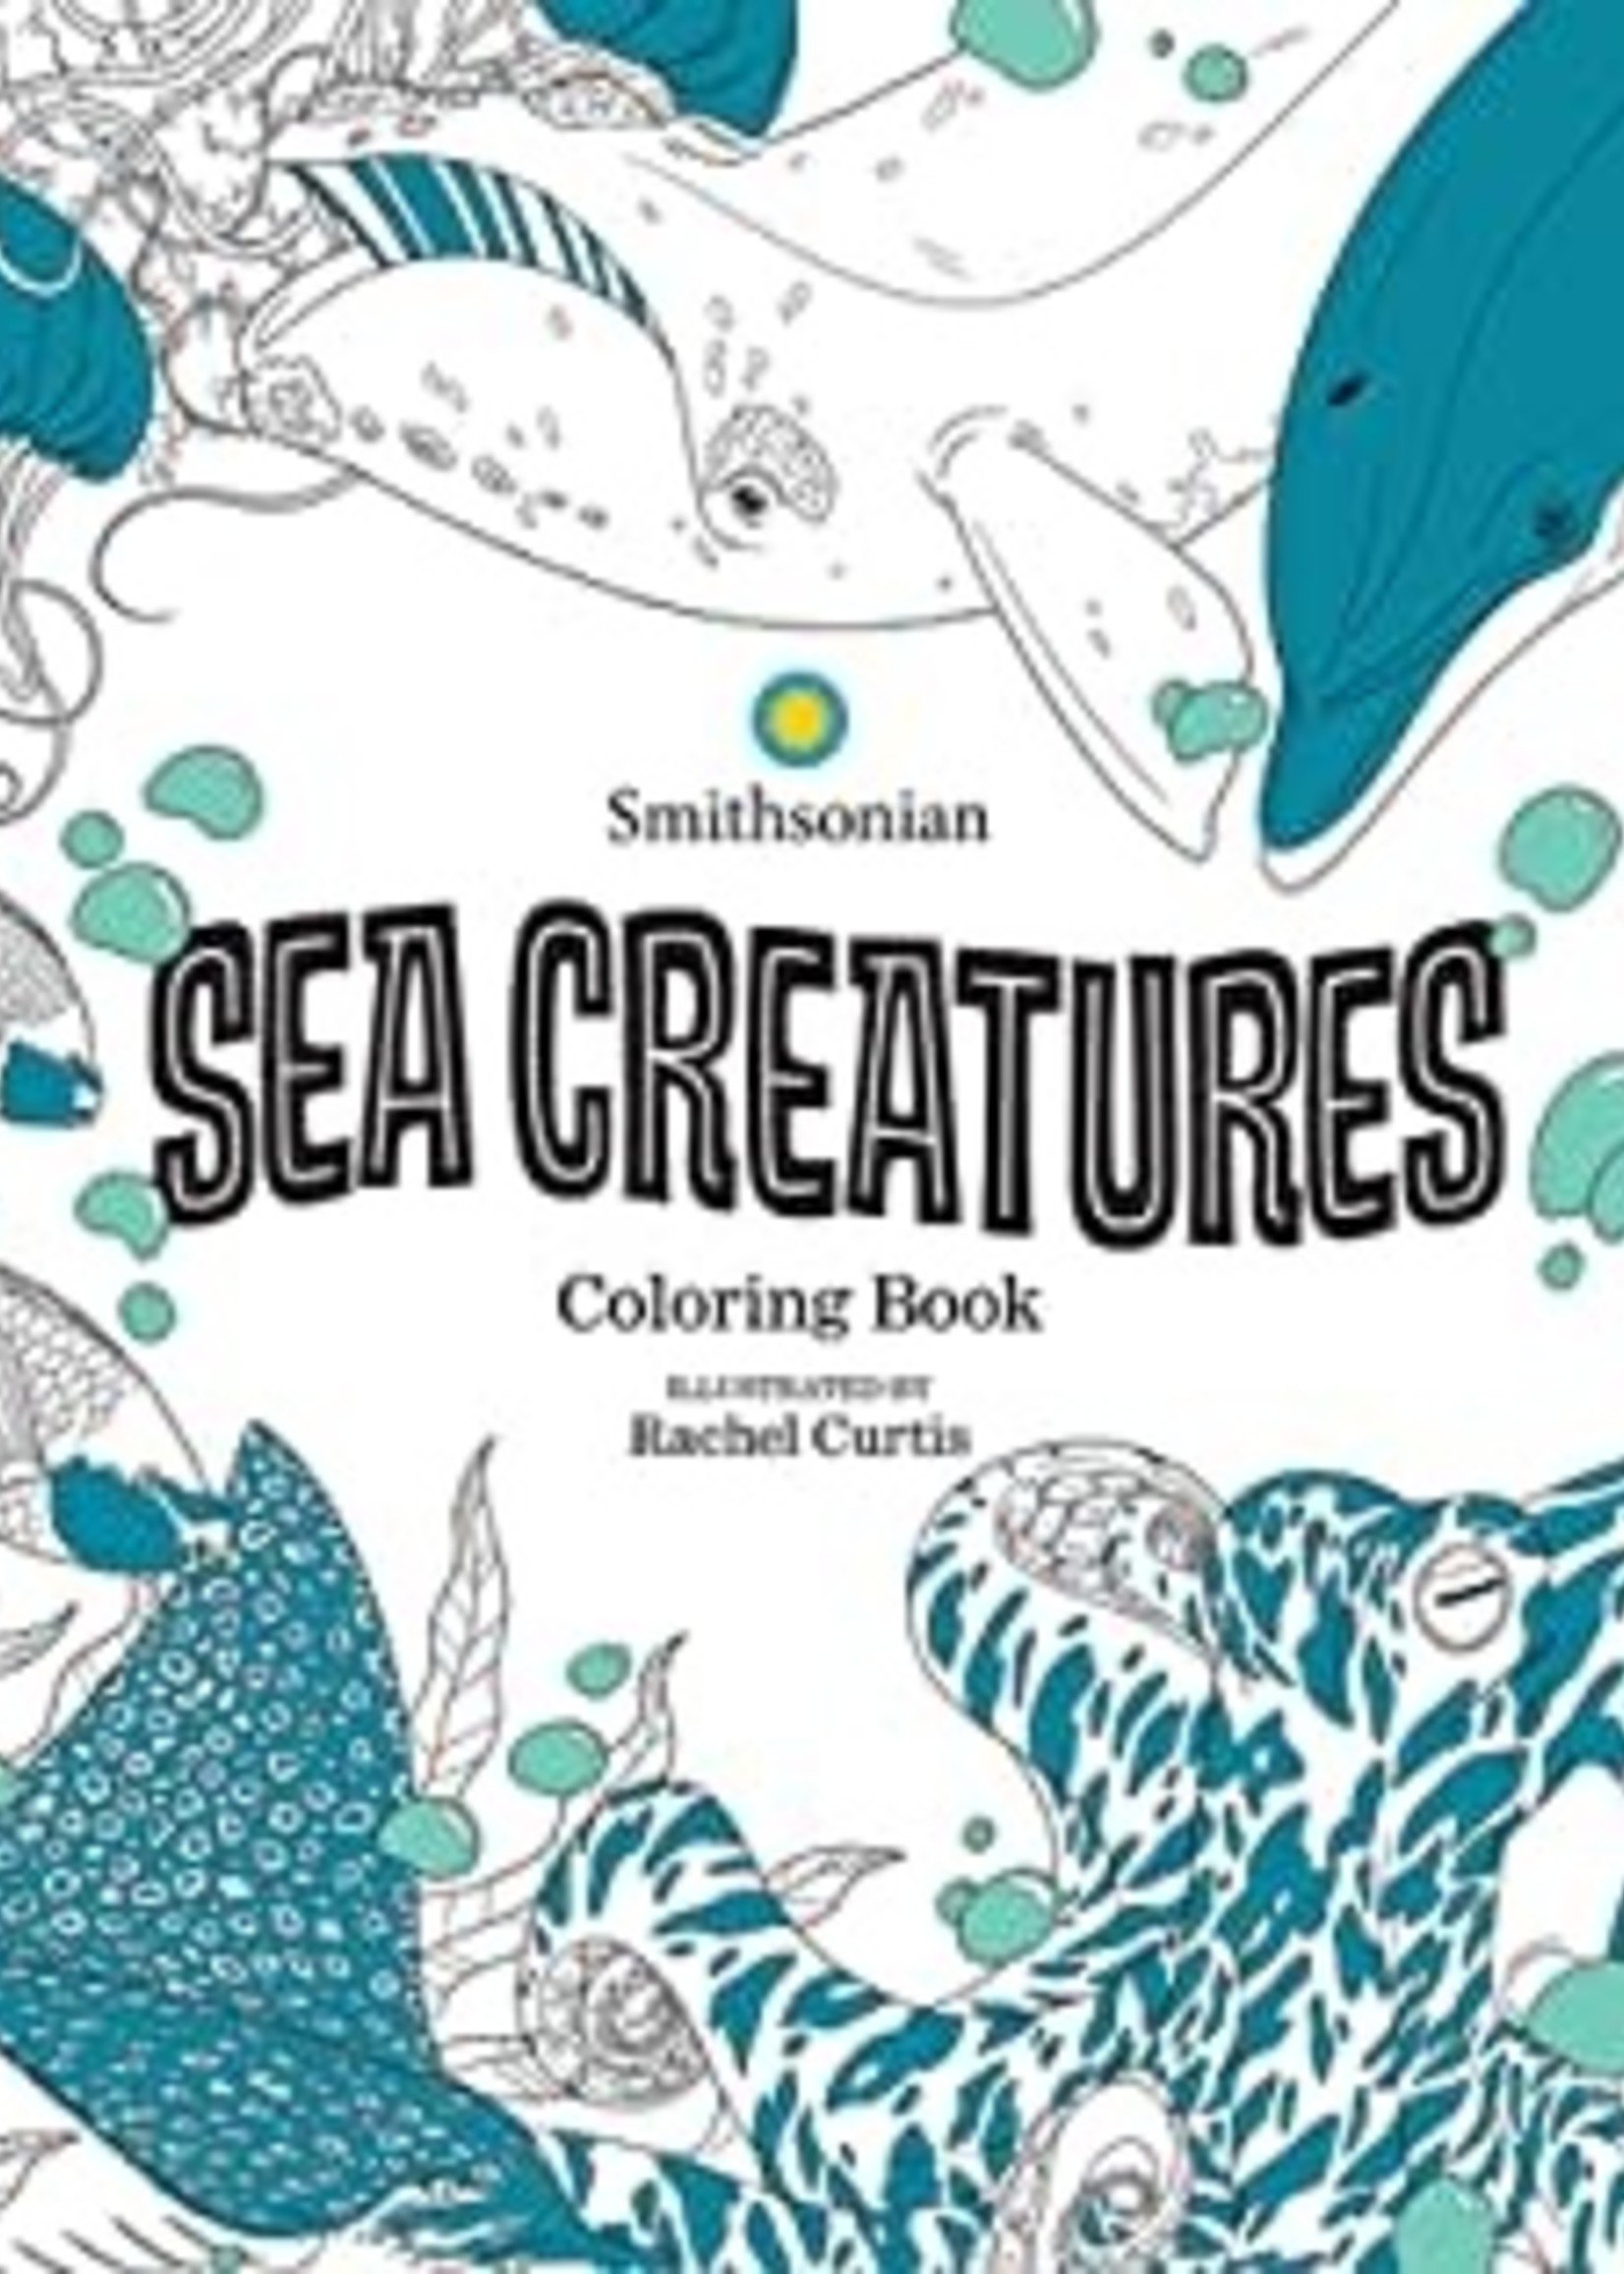 Sea Creatures: A Smithsonian Coloring Book by Smithsonian Institution, Rachel Curtis